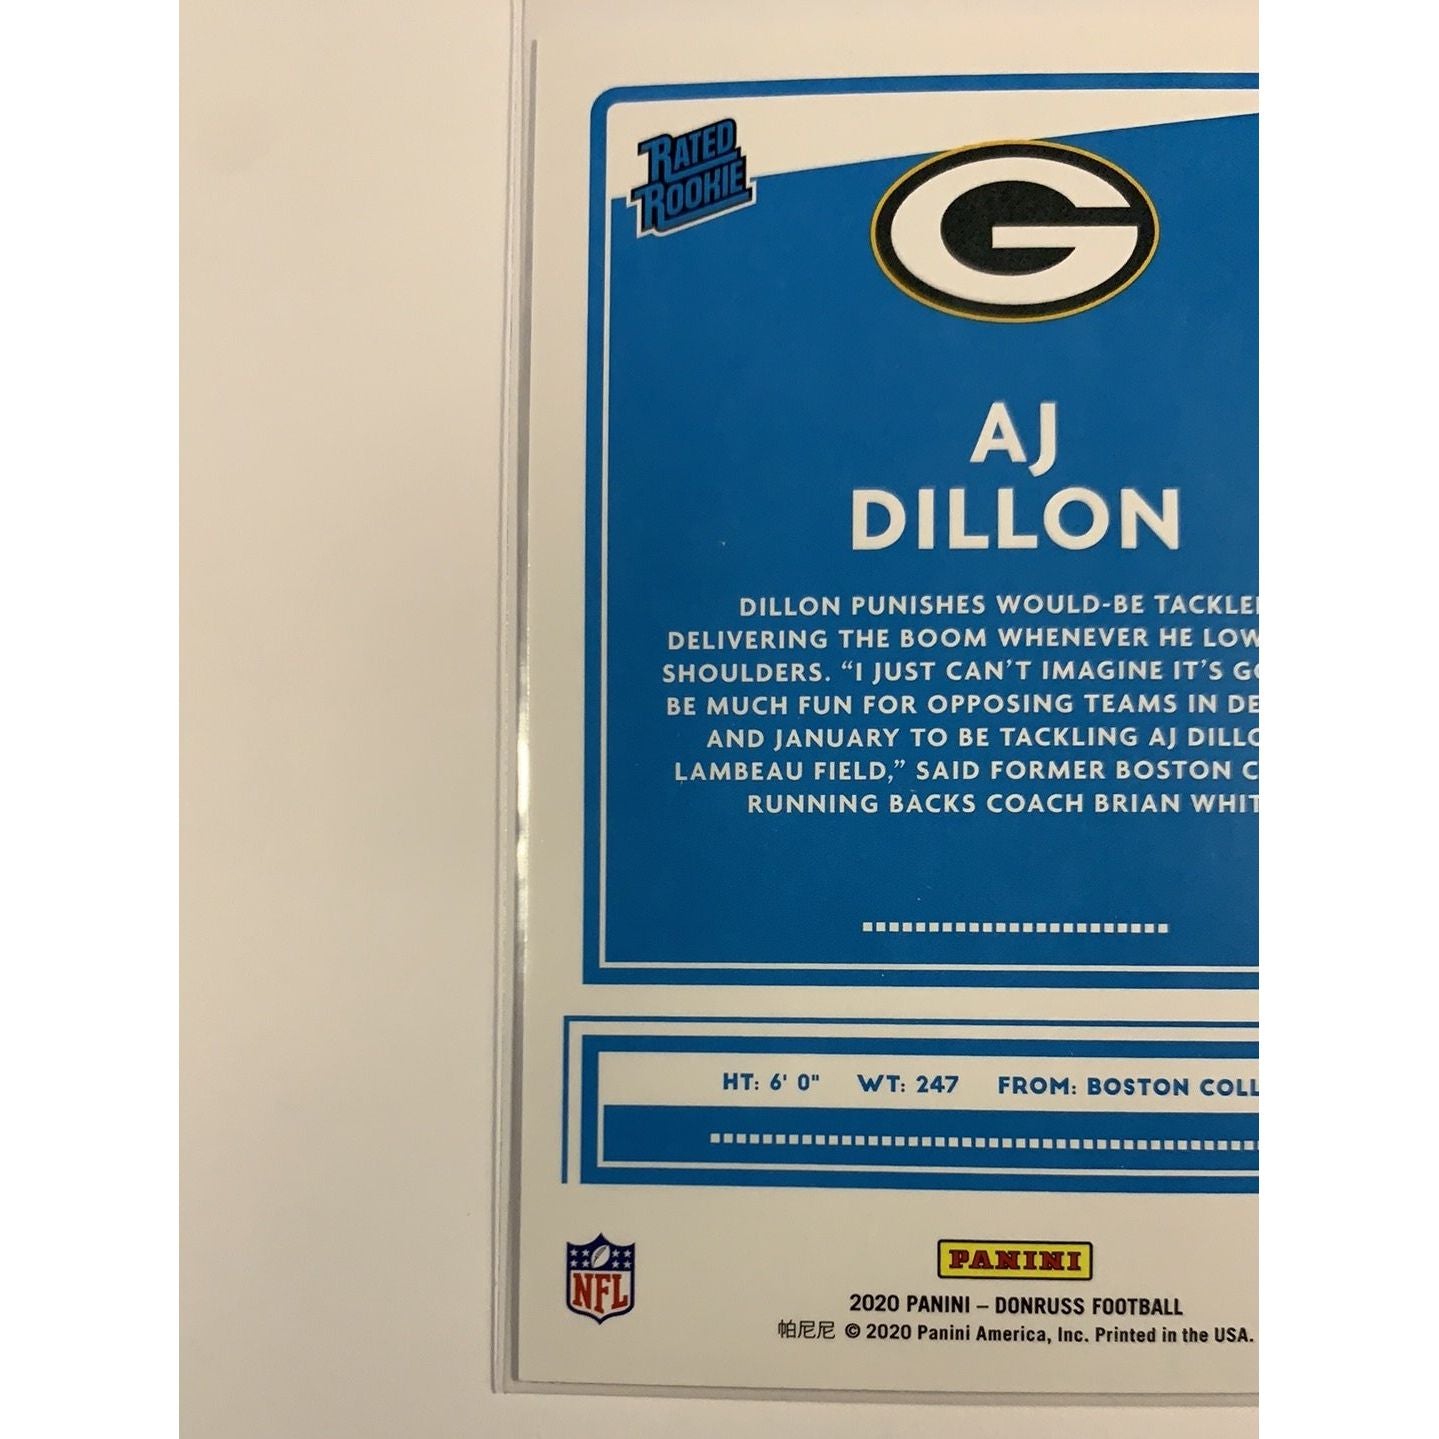  2020 Donruss Aj Dillon Rated Rookie  Local Legends Cards & Collectibles